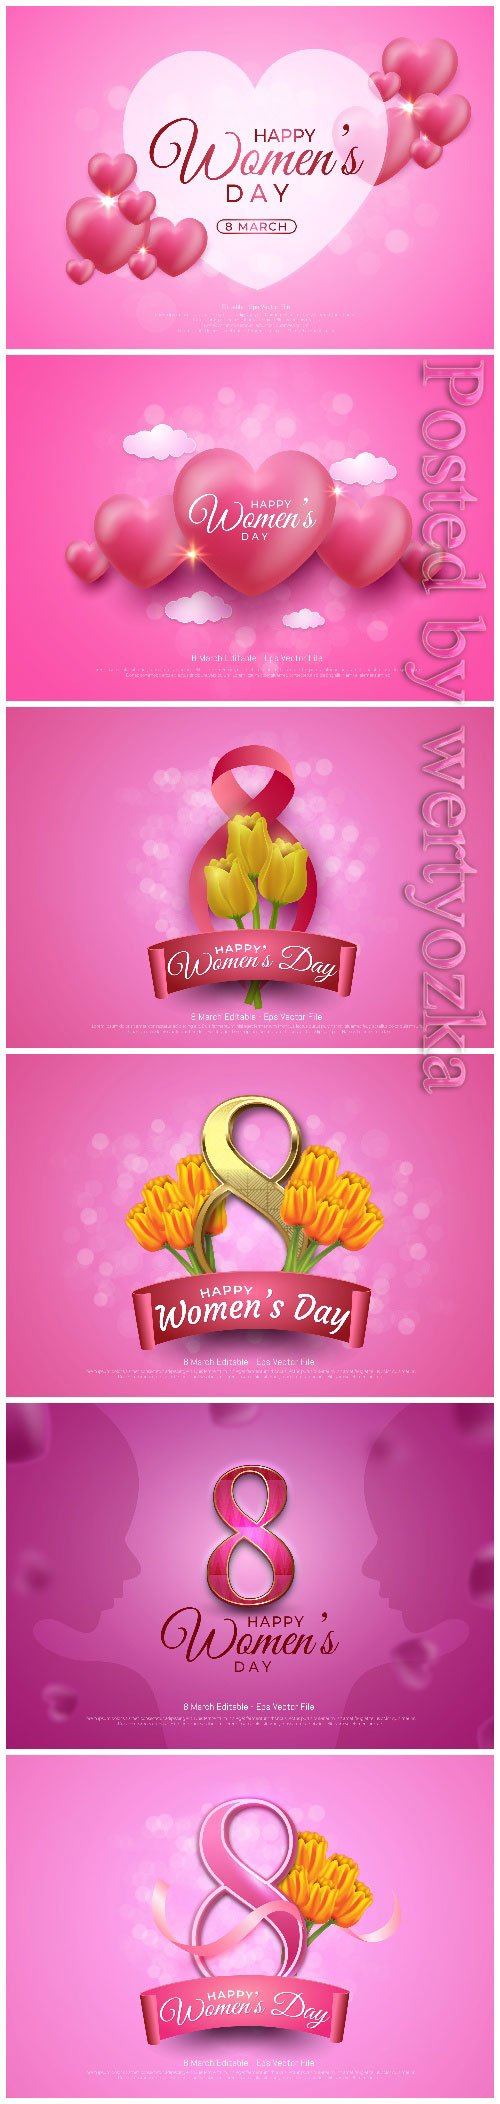 Editable text effect, women's day 8 march with flowers